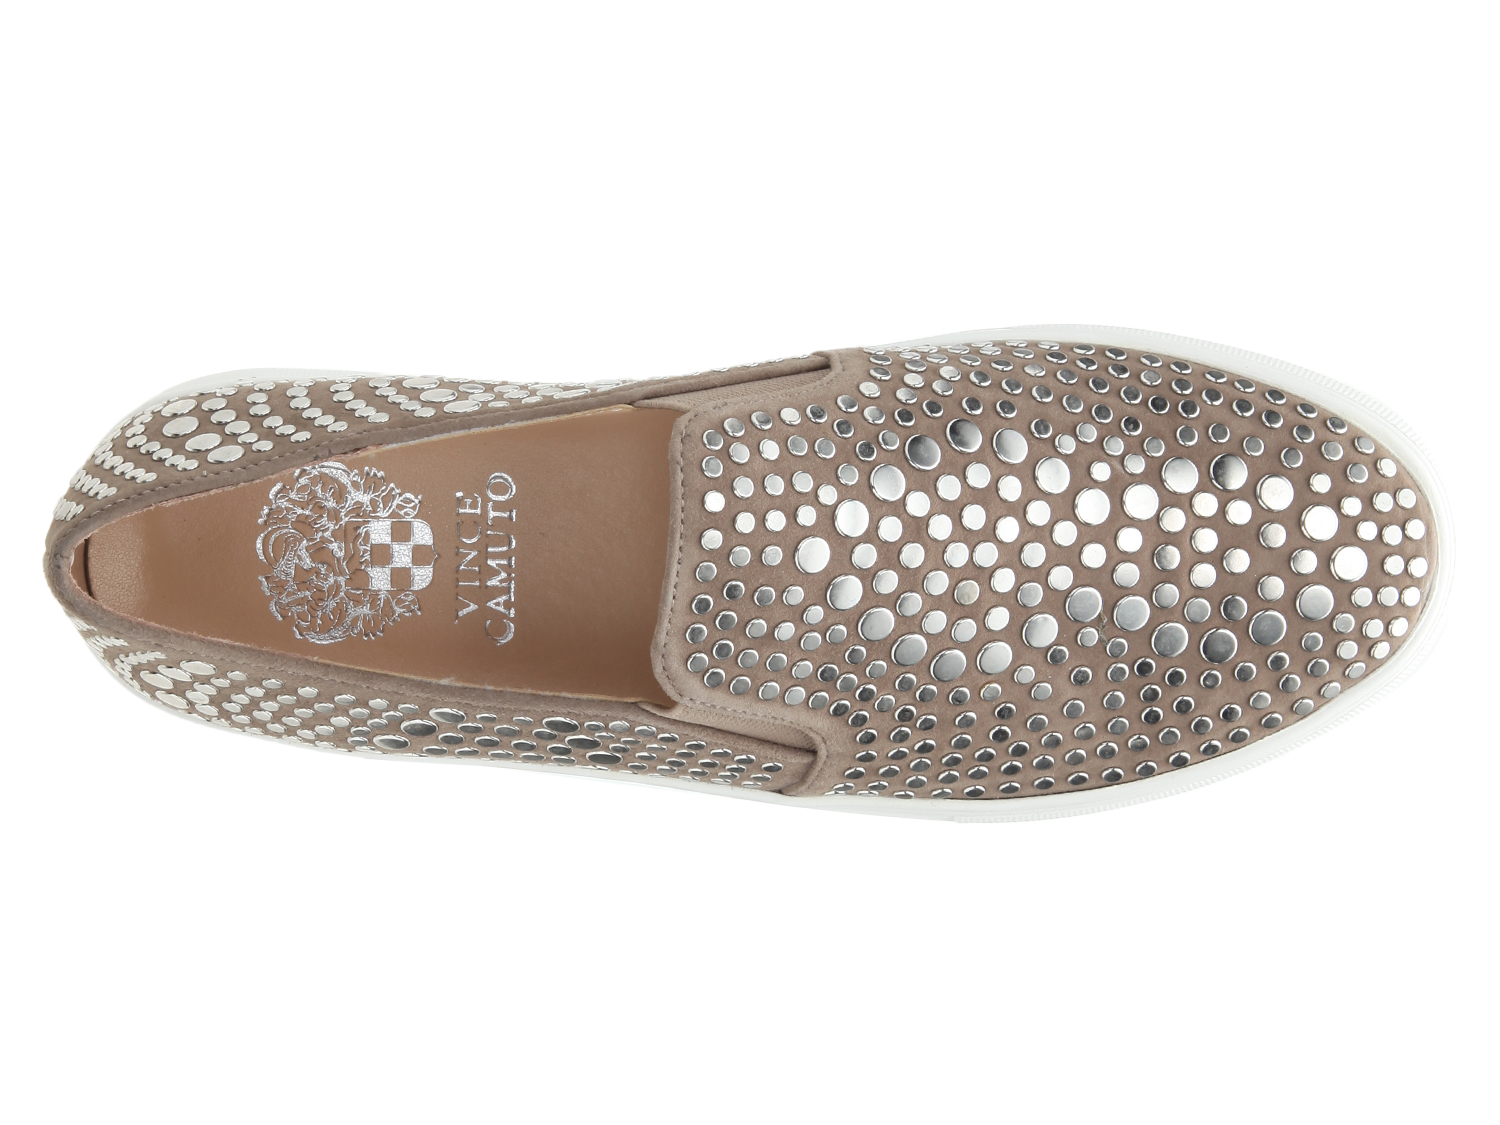 VINCE CAMUTO NEW KINDRA STUDDED SNEAKER 